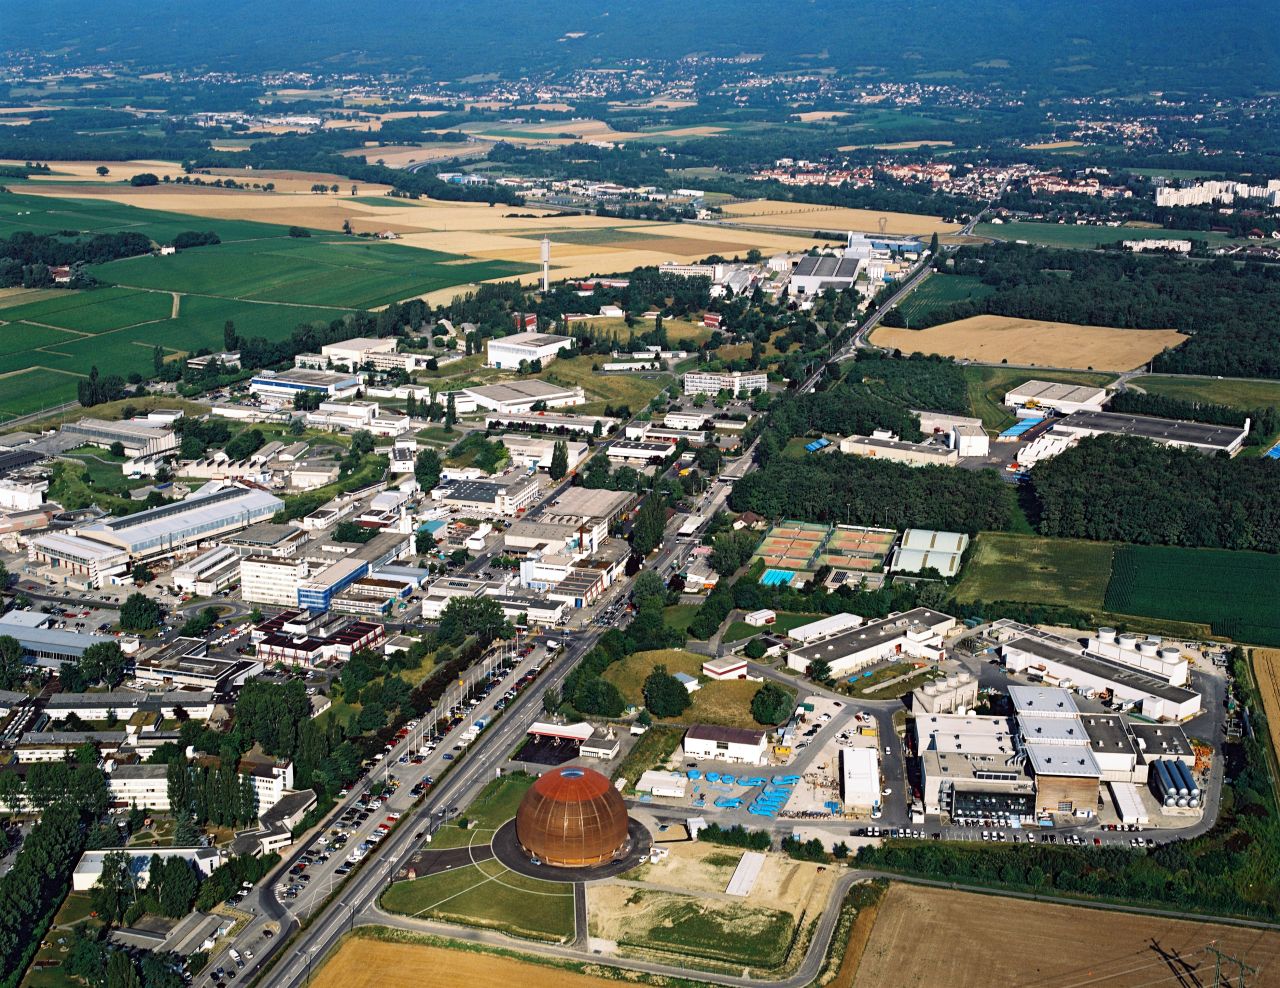 CERN's Globe of Science and Innovation exhibition center and surface buildings, which provide access to the Large Hadron Collider, can be seen near Geneva, Switzerland. CERN Director General Rolf Heuer said, "There is much benefit in combining the results of large experiments to reach the high precision needed for the next breakthrough in our field. By doing so, we achieve what for a single experiment would have meant running for at least 2 more years."